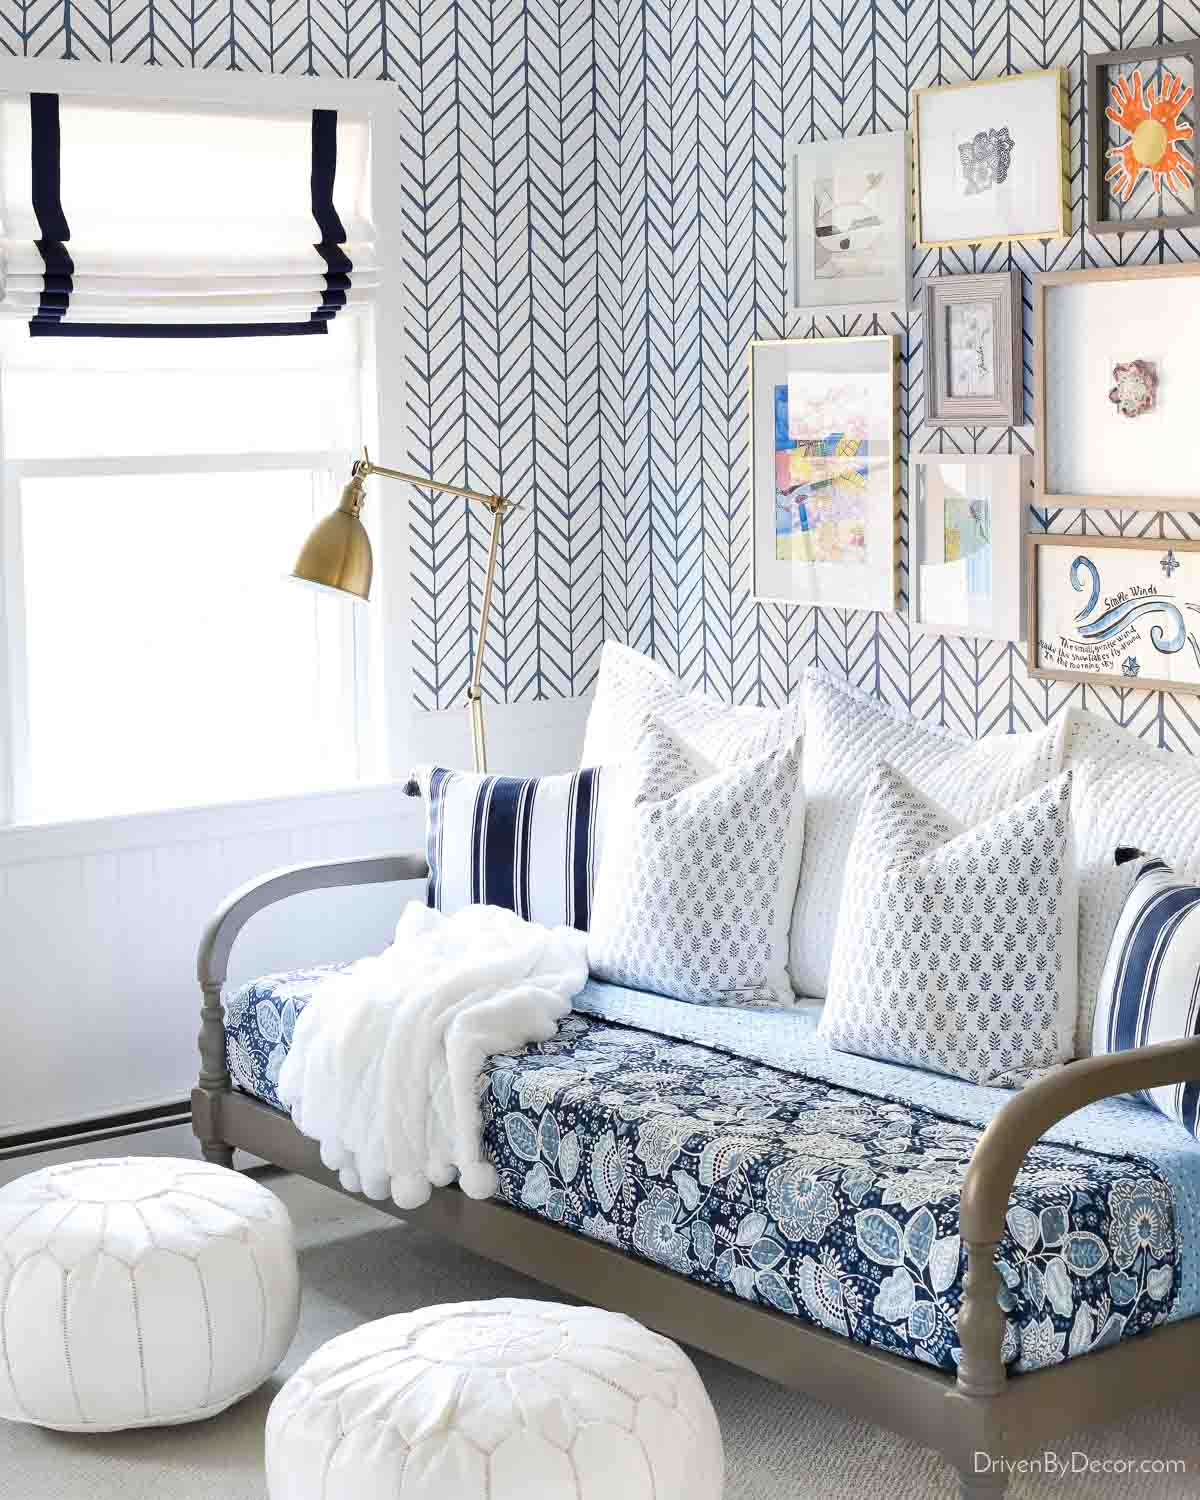 White Roman shades with navy trim in room with daybed